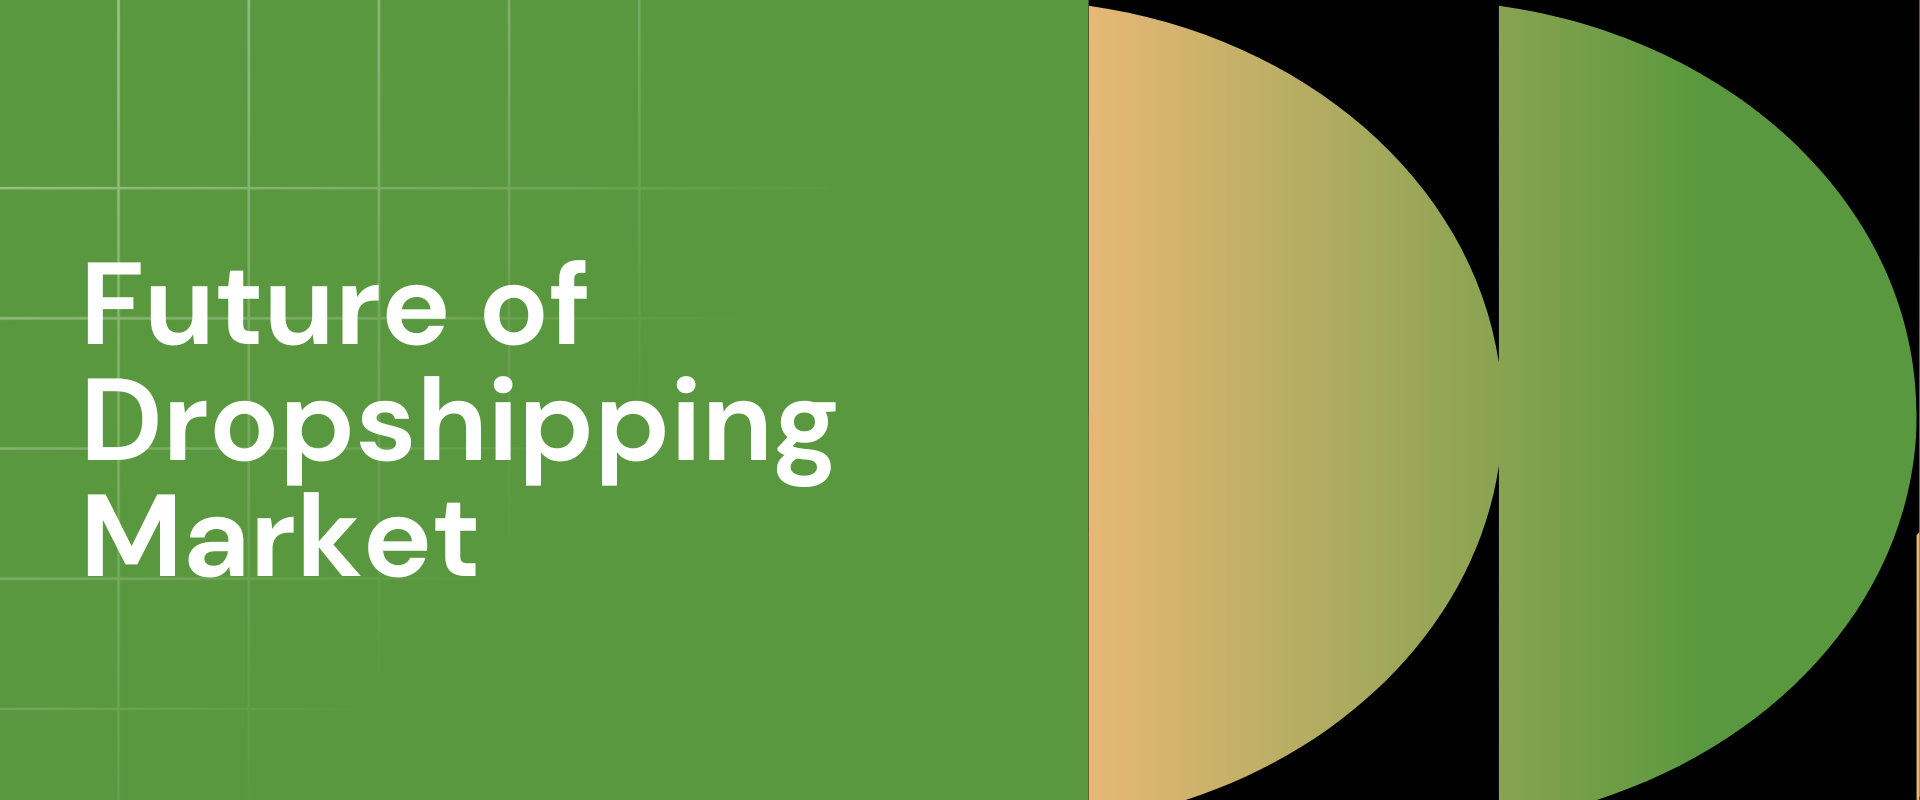 Future of Dropshipping Market: 8 Bold Predictions for Market’s Growth